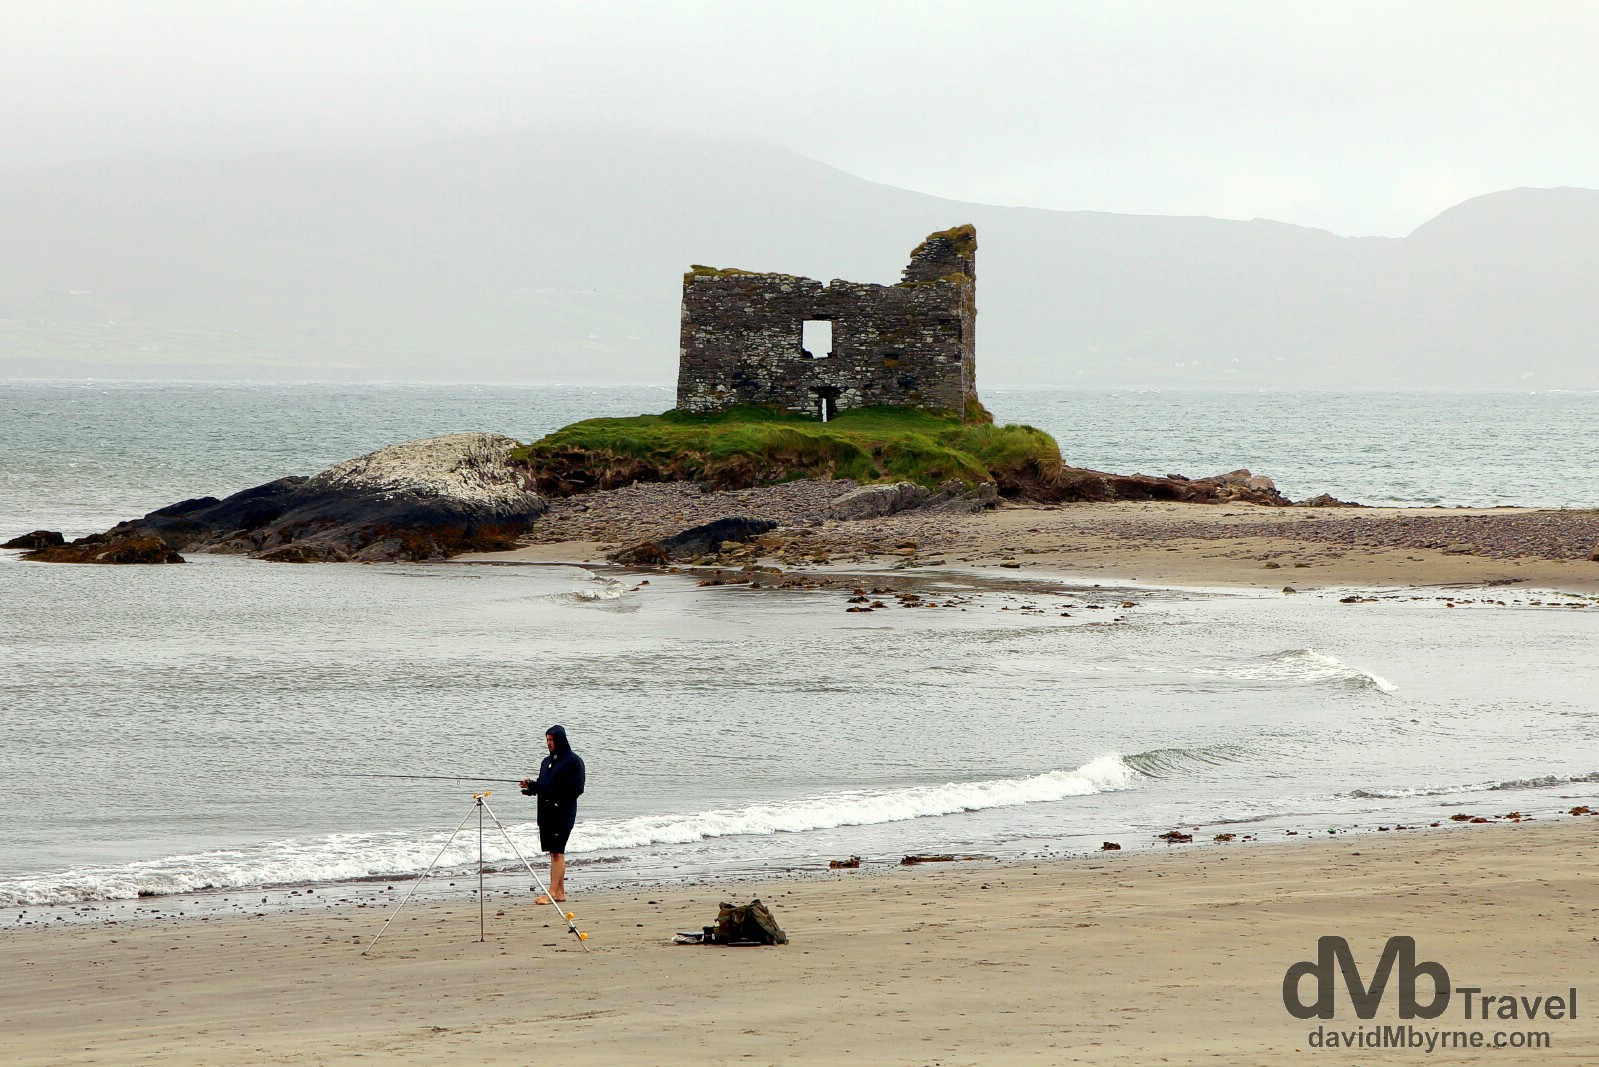 McCarthy’s Mor, the famous 'castle on the beach', in Ballinskelligs, Co. Kerry, Ireland. August 28, 2014.